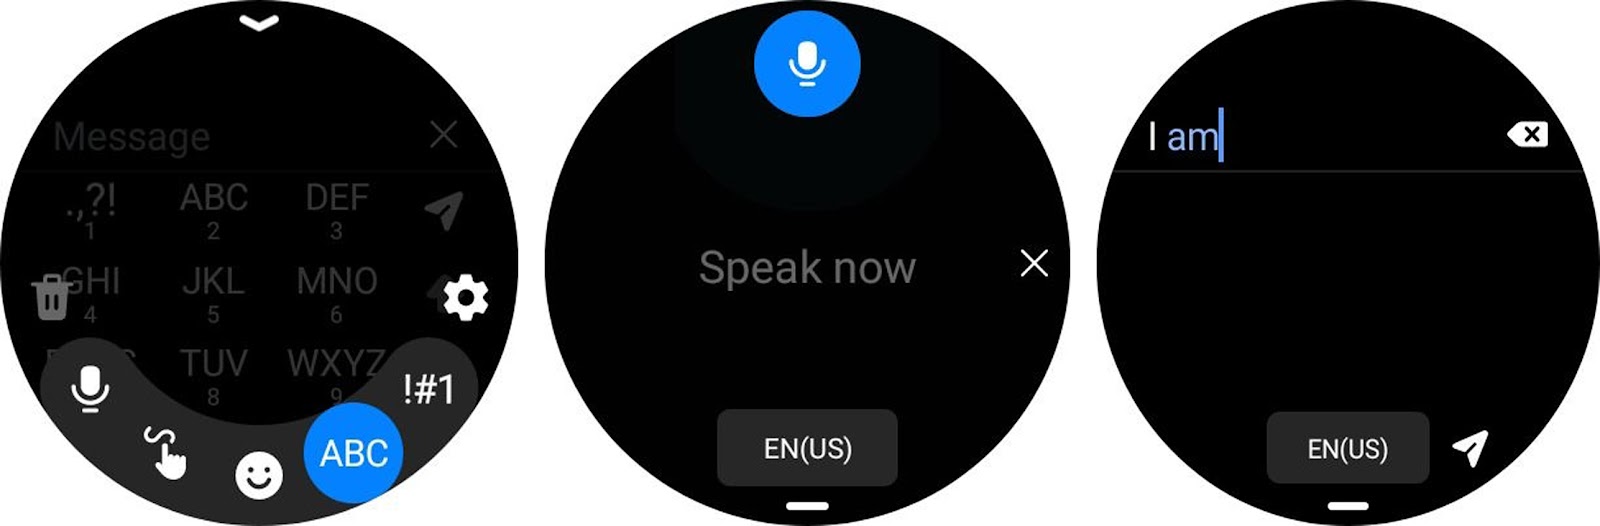 How to reply using the built-in Galaxy Watch keyboard?